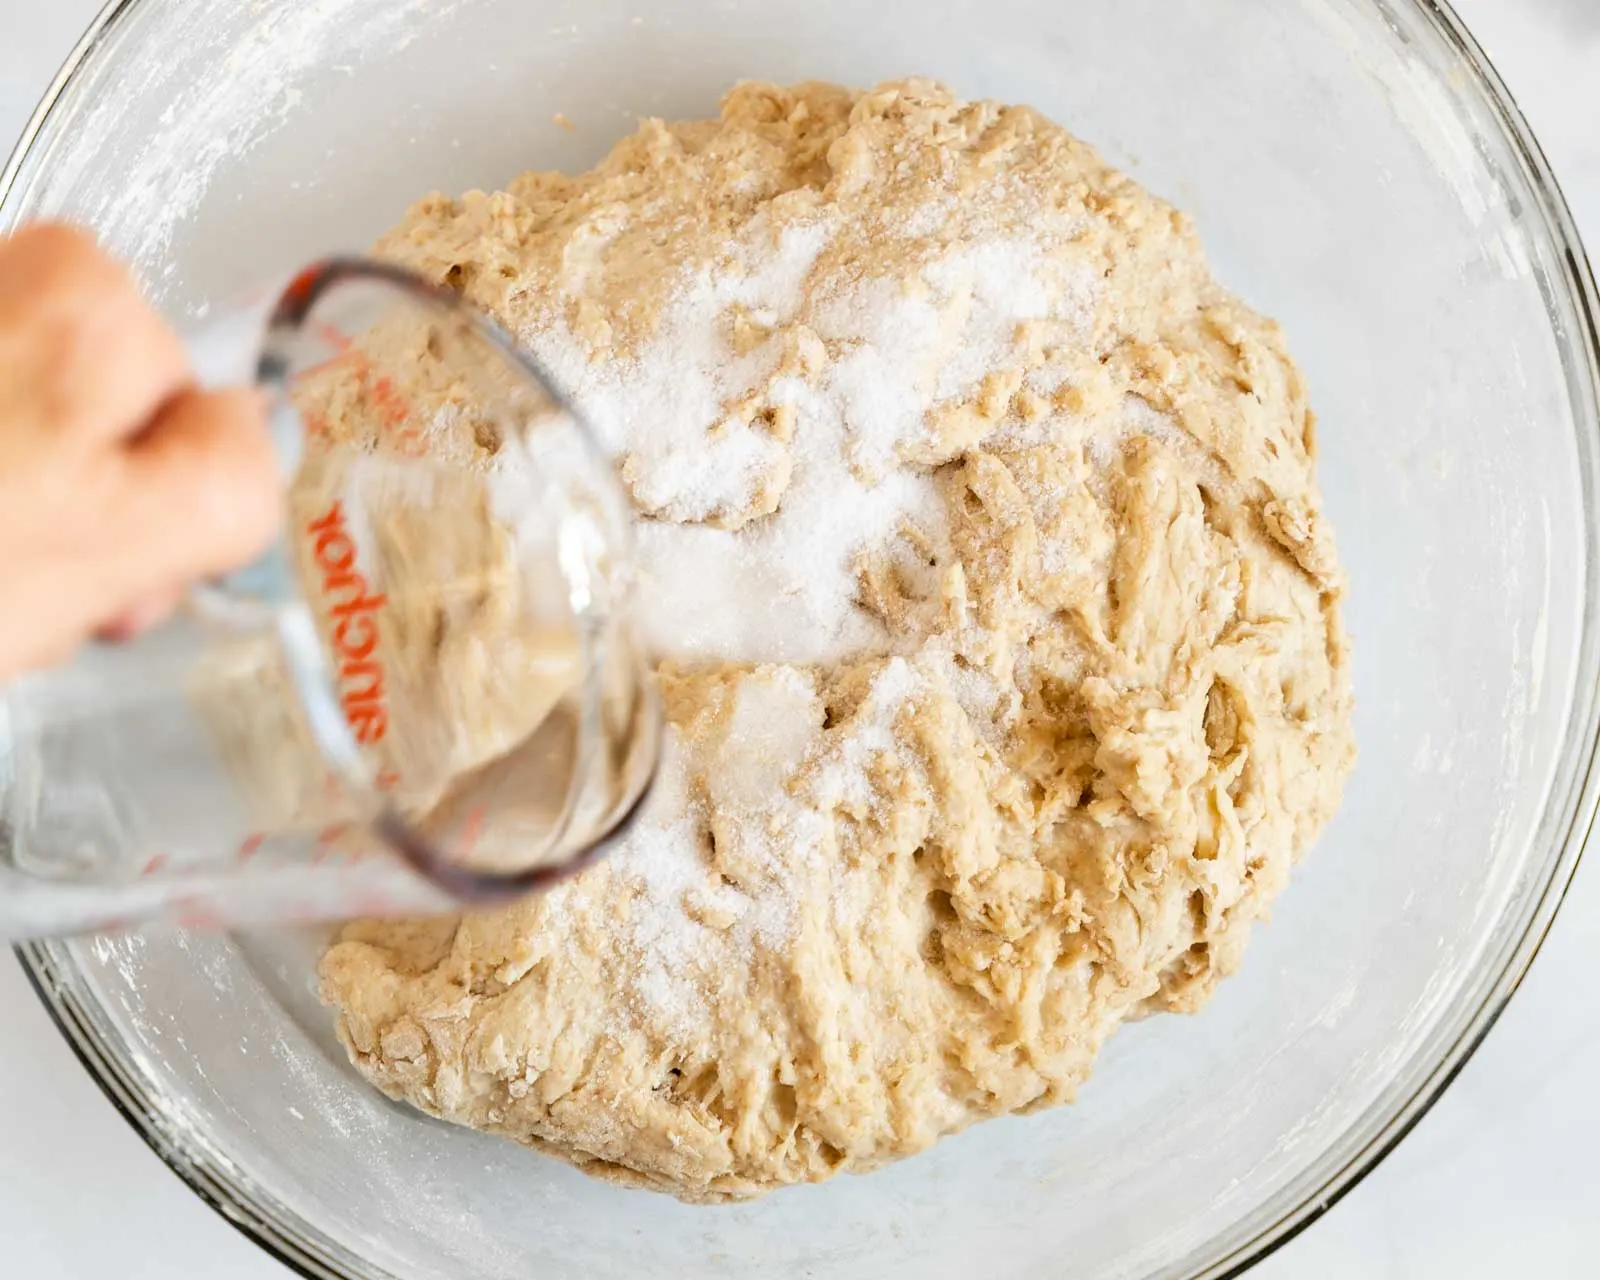 Salt and water added to bread dough in a bowl.